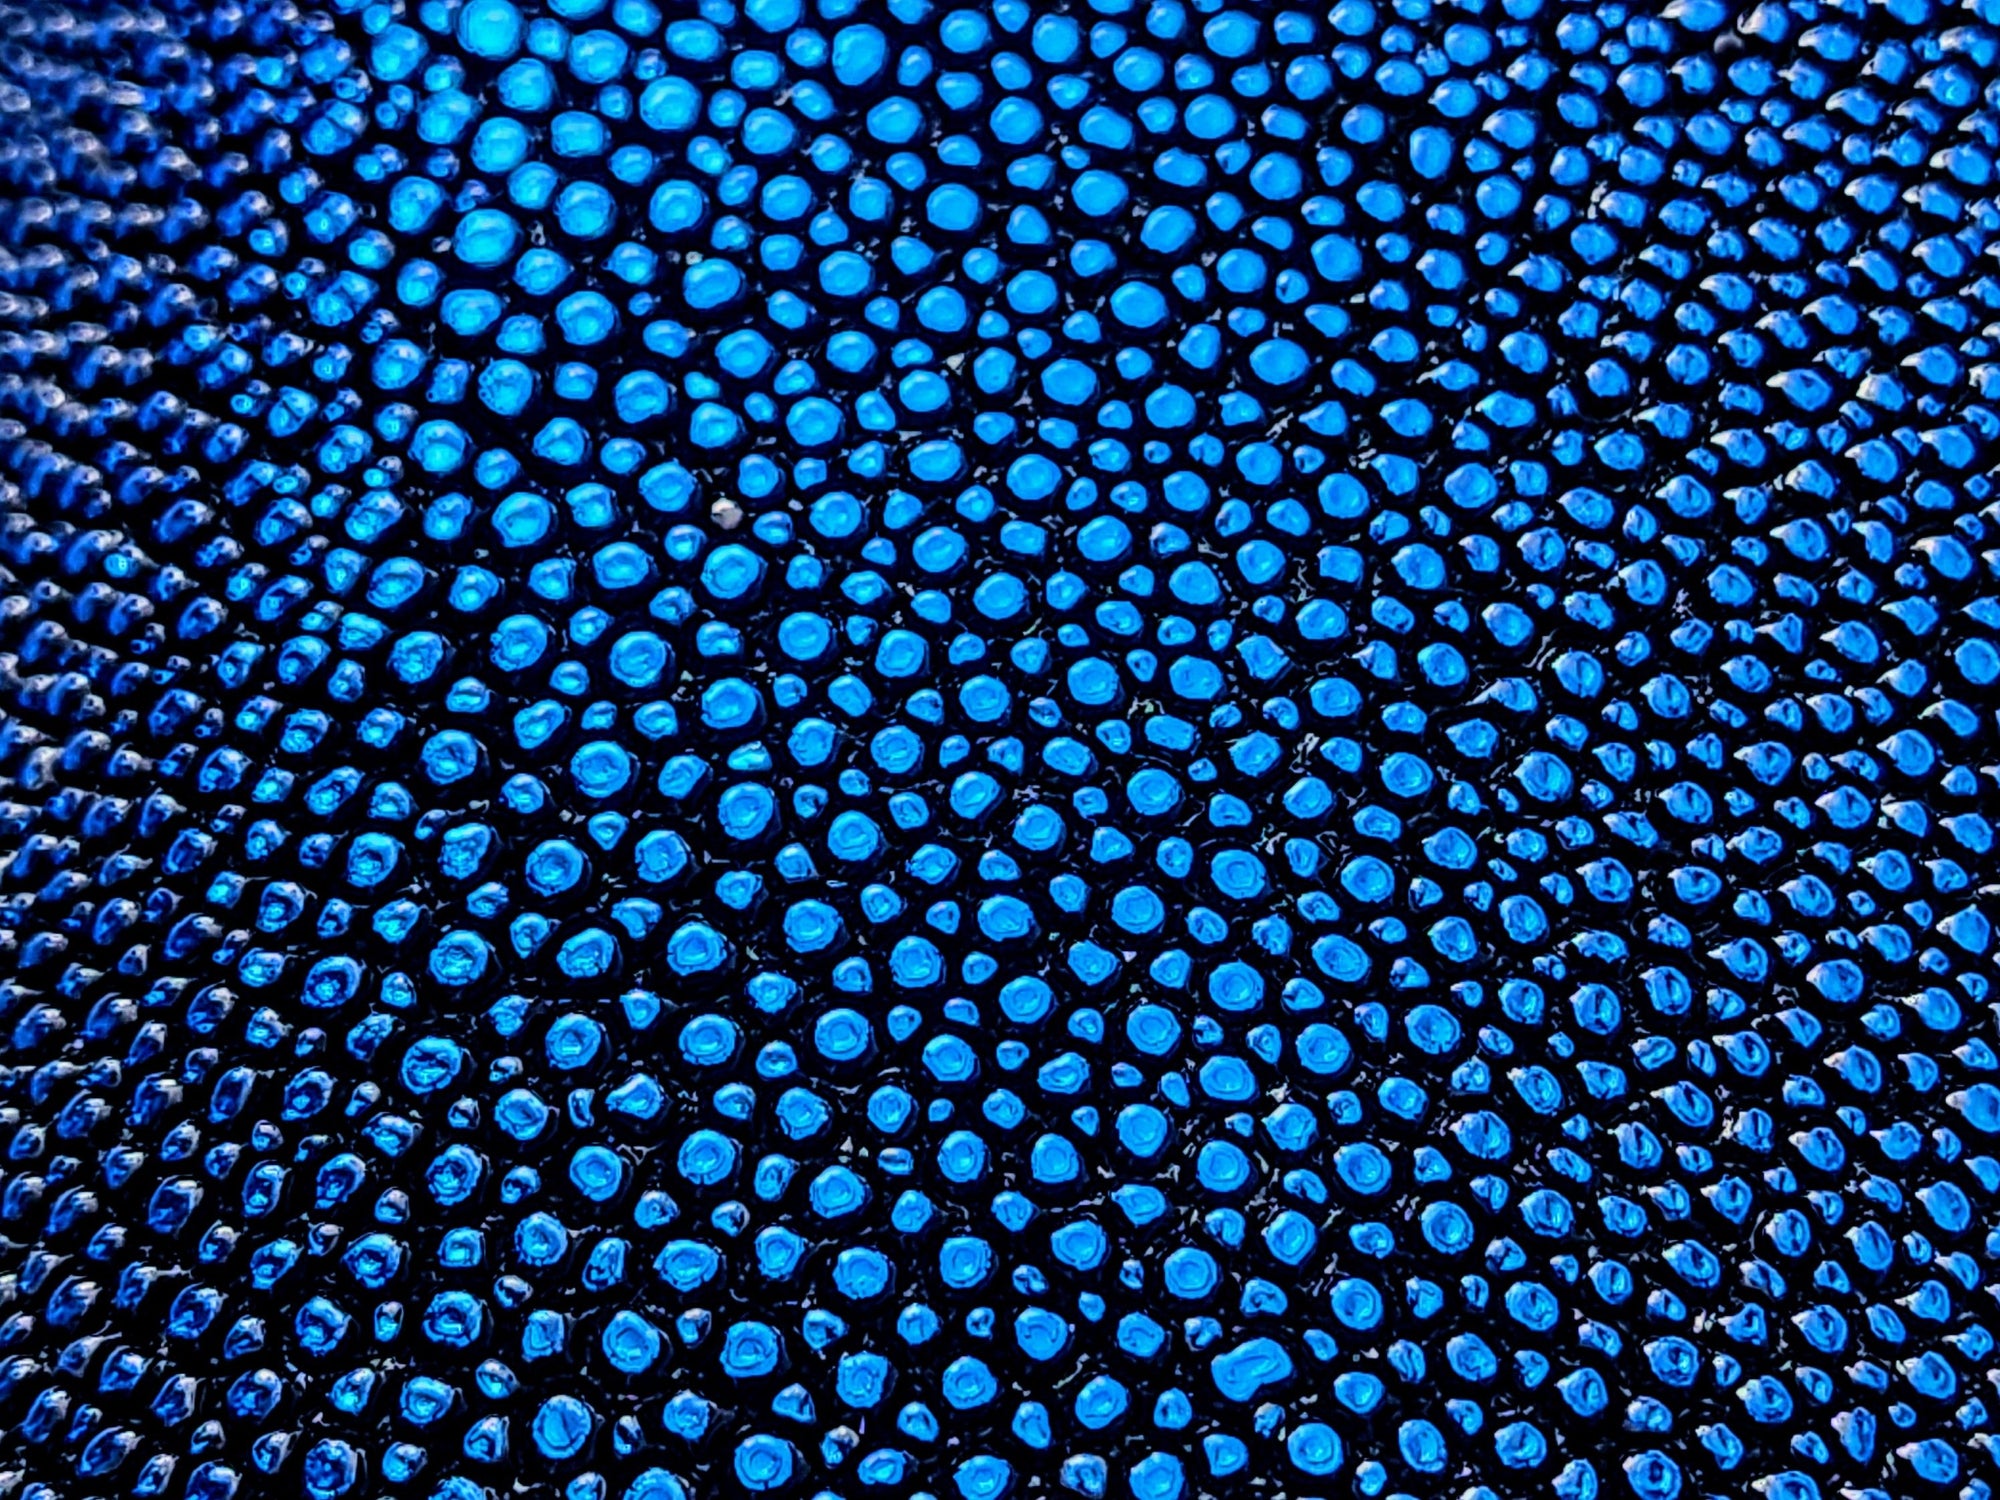  Capture the beauty of metallic stingray leather with this detailed shot in a vibrant blue shade.